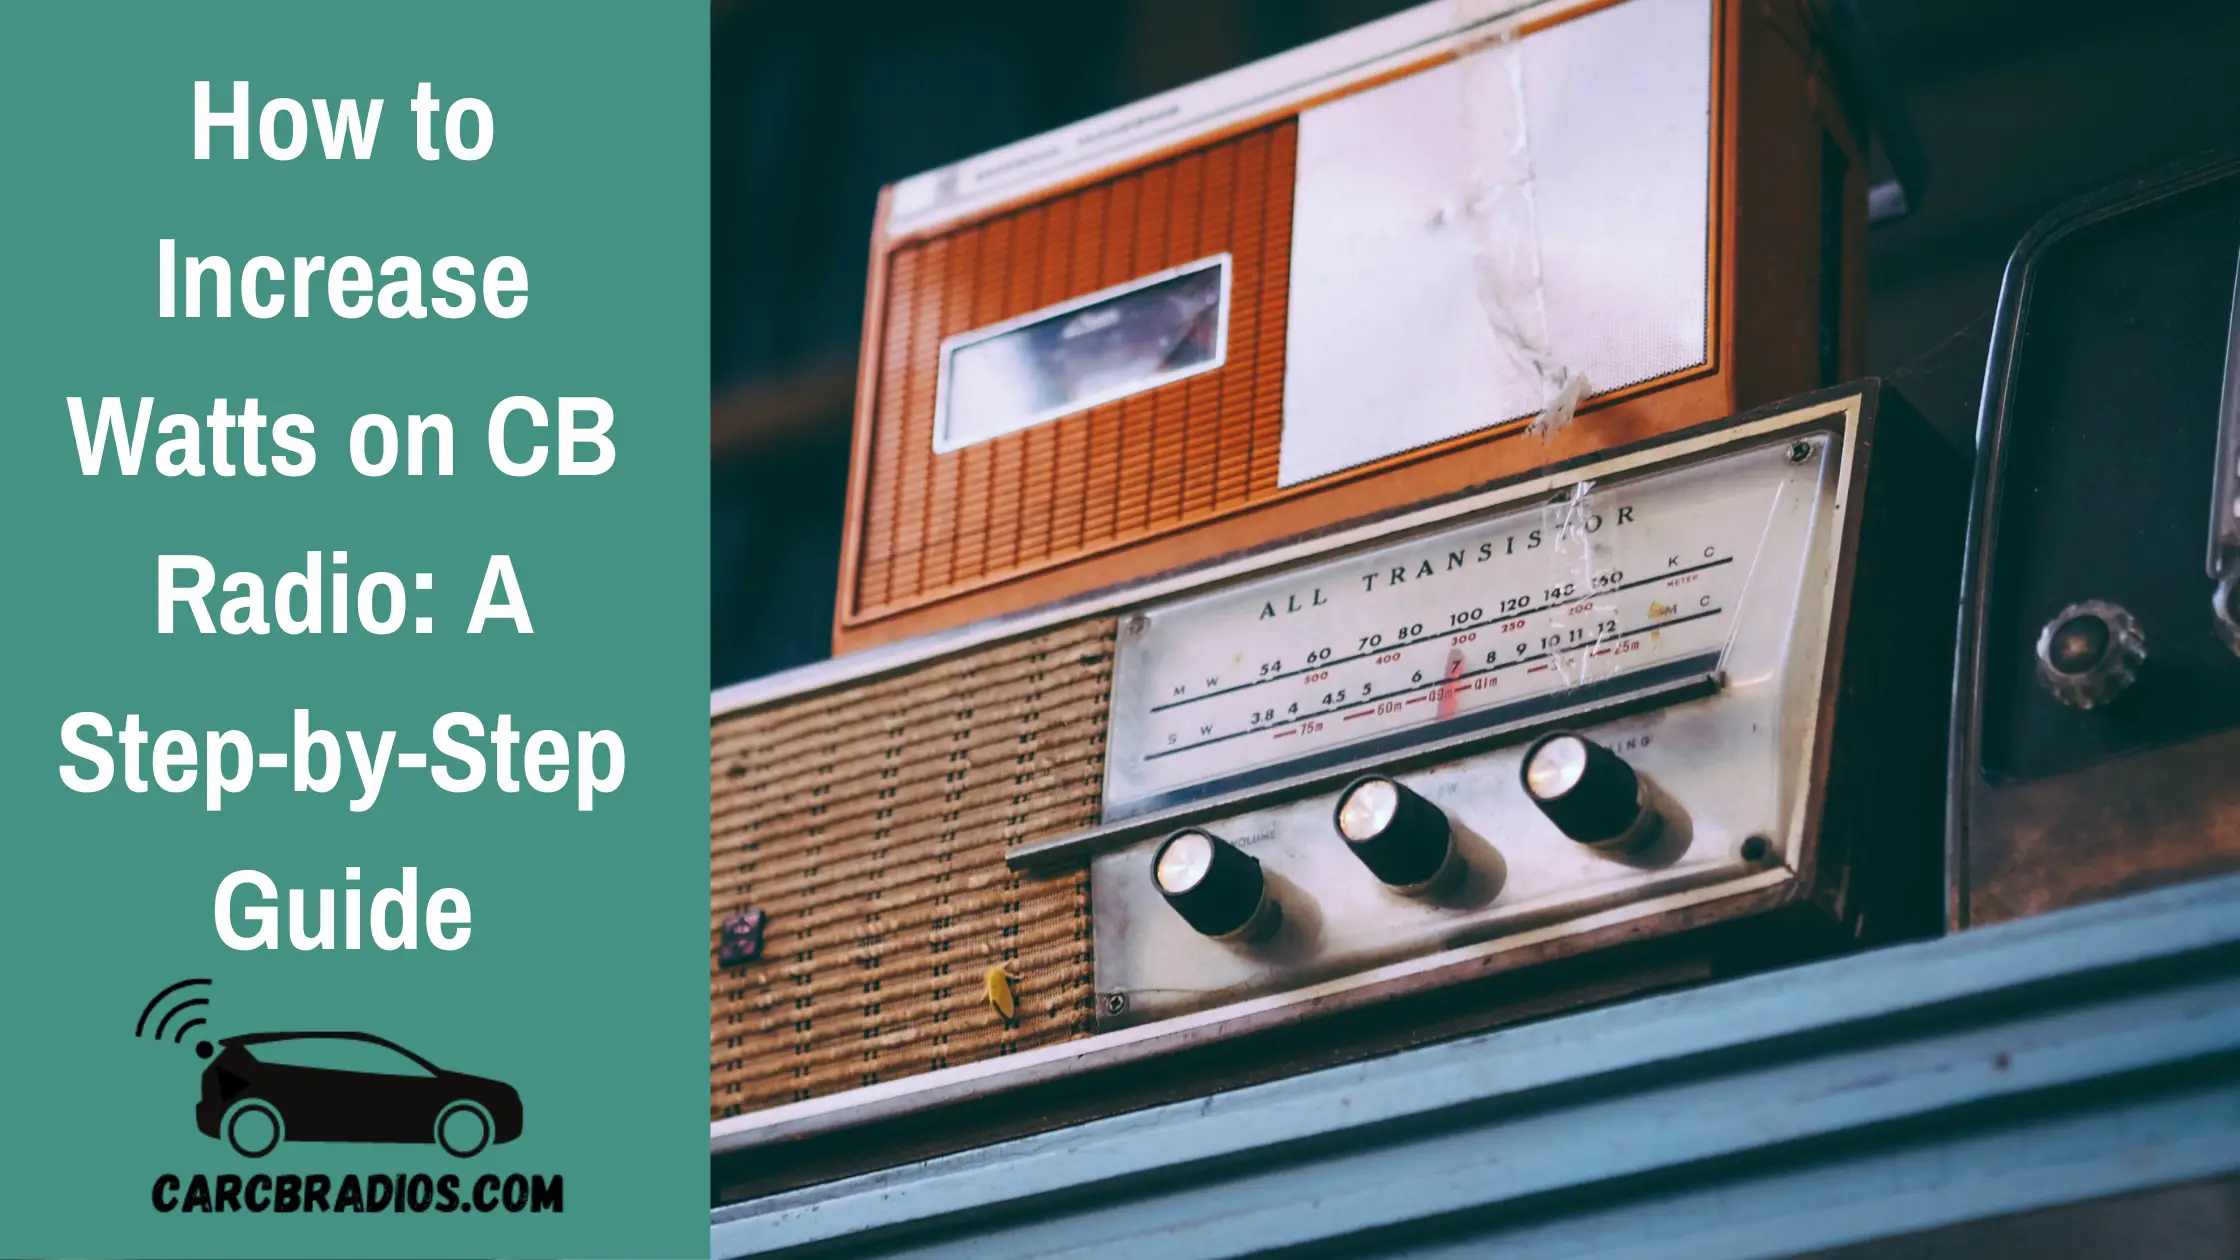 In this article, I will guide you through the step-by-step process of increasing watts on CB radio. You will learn how to pick the right location, install a good antenna, invest in an amplifier, and use the radio's manual squelch. Additionally, I will provide you with pro tips on how to choose the right CB radio for a specific application, look for an RF gain, choose the right channel, and master the codes.